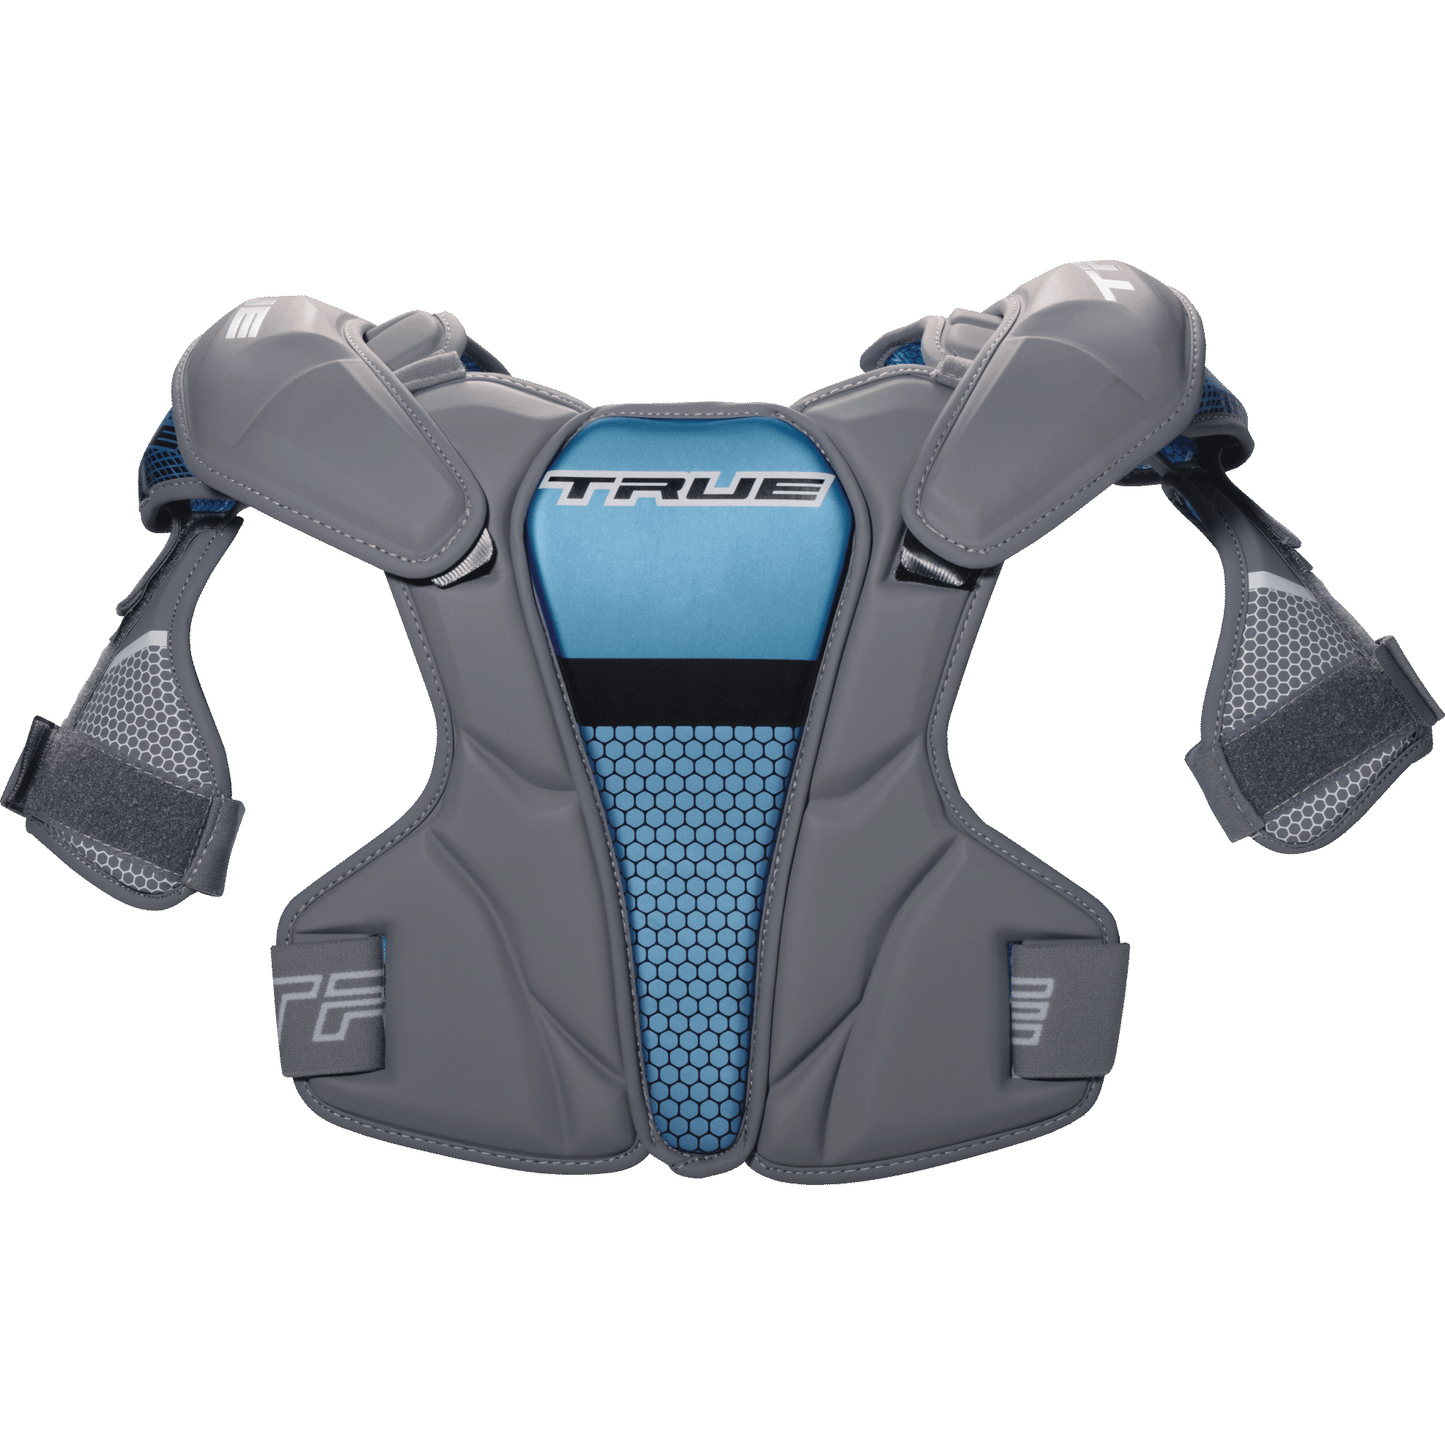 TRUE Frequency 2.0 Shoulder Pad